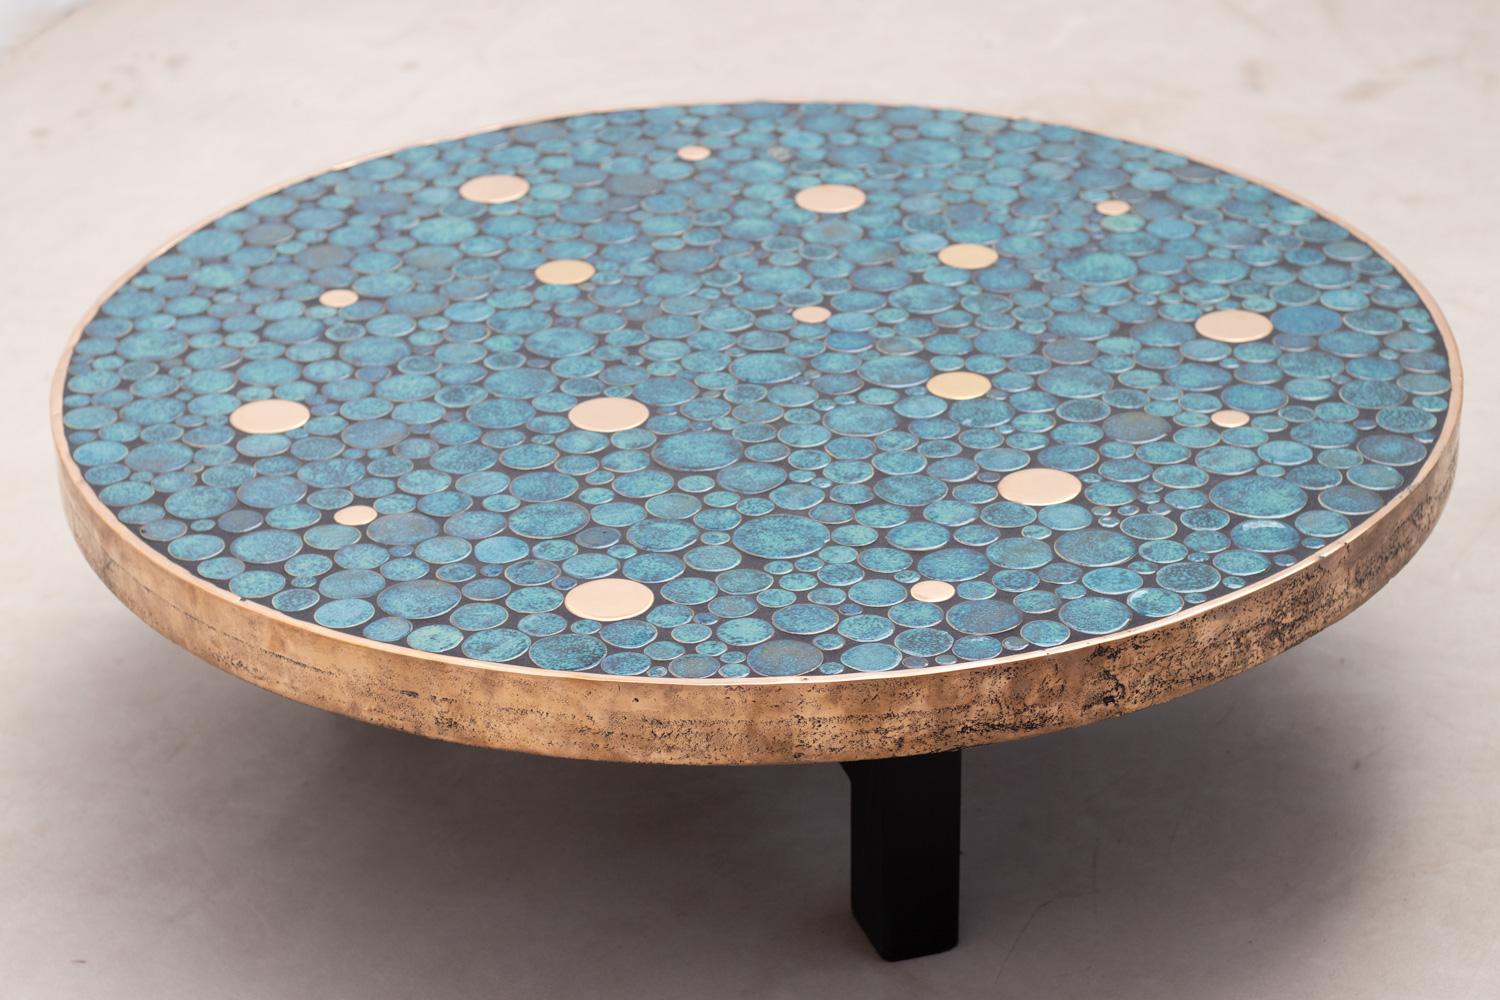 Contemporary coffee table by Belgian artist ALIETTE VLIERS.
This table features a tablet with plenty of unique ceramic circle pieces with different sizes, offering a range of shades of blue combined with brass circle pieces. The whole is framed by a